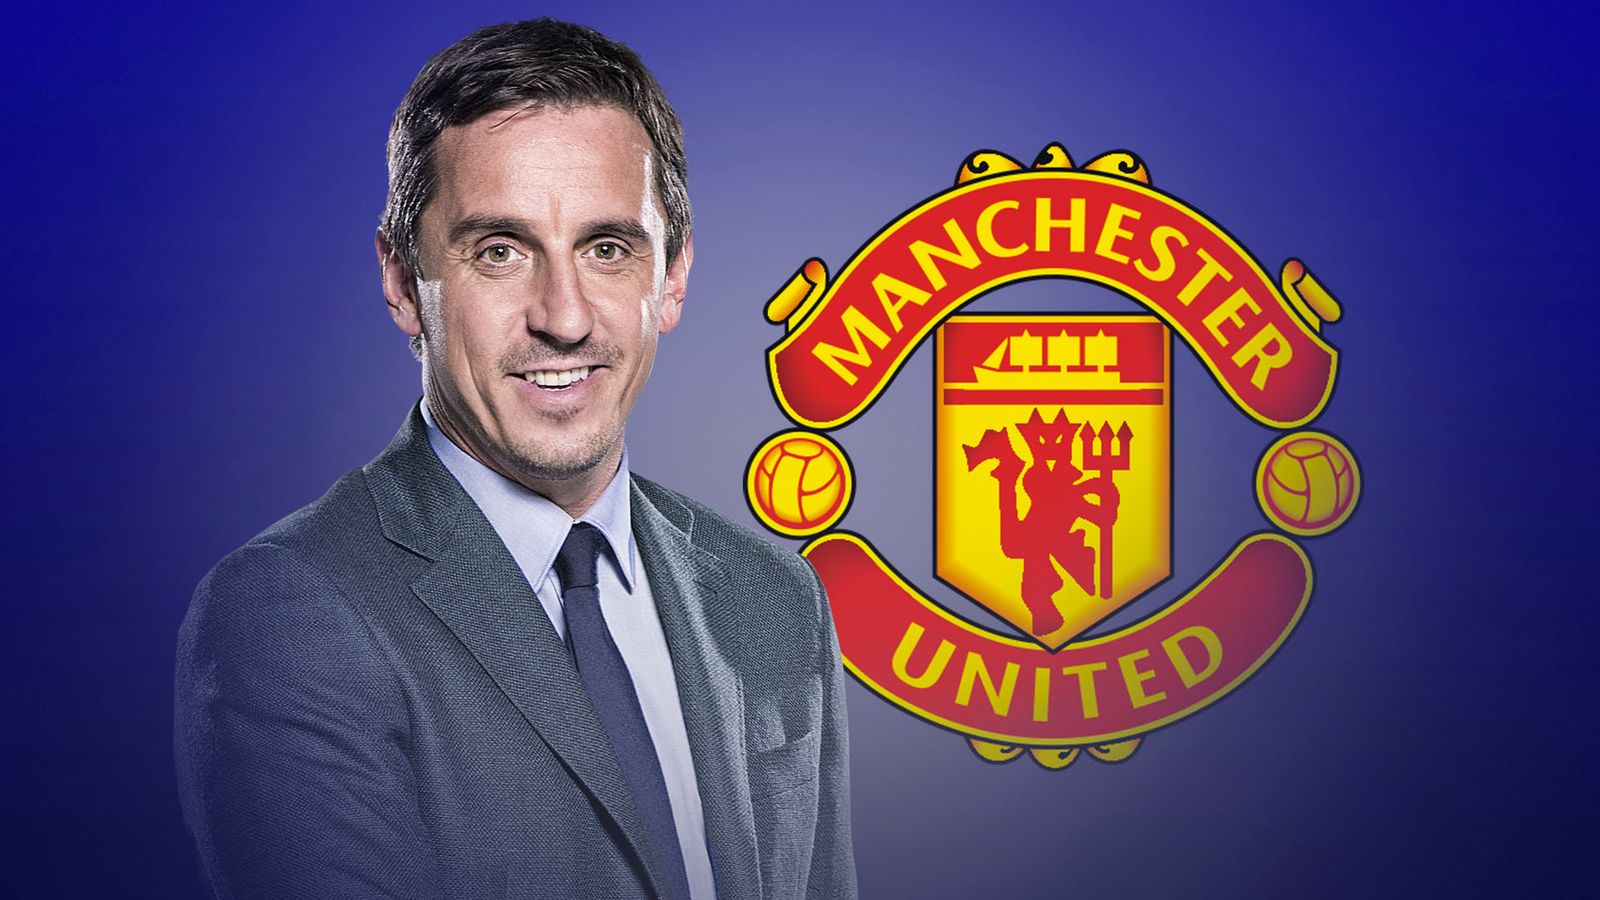 Gary Neville urges Glazer family to sell Manchester United after Erik ten Hag’s first game ends in defeat to Brighton